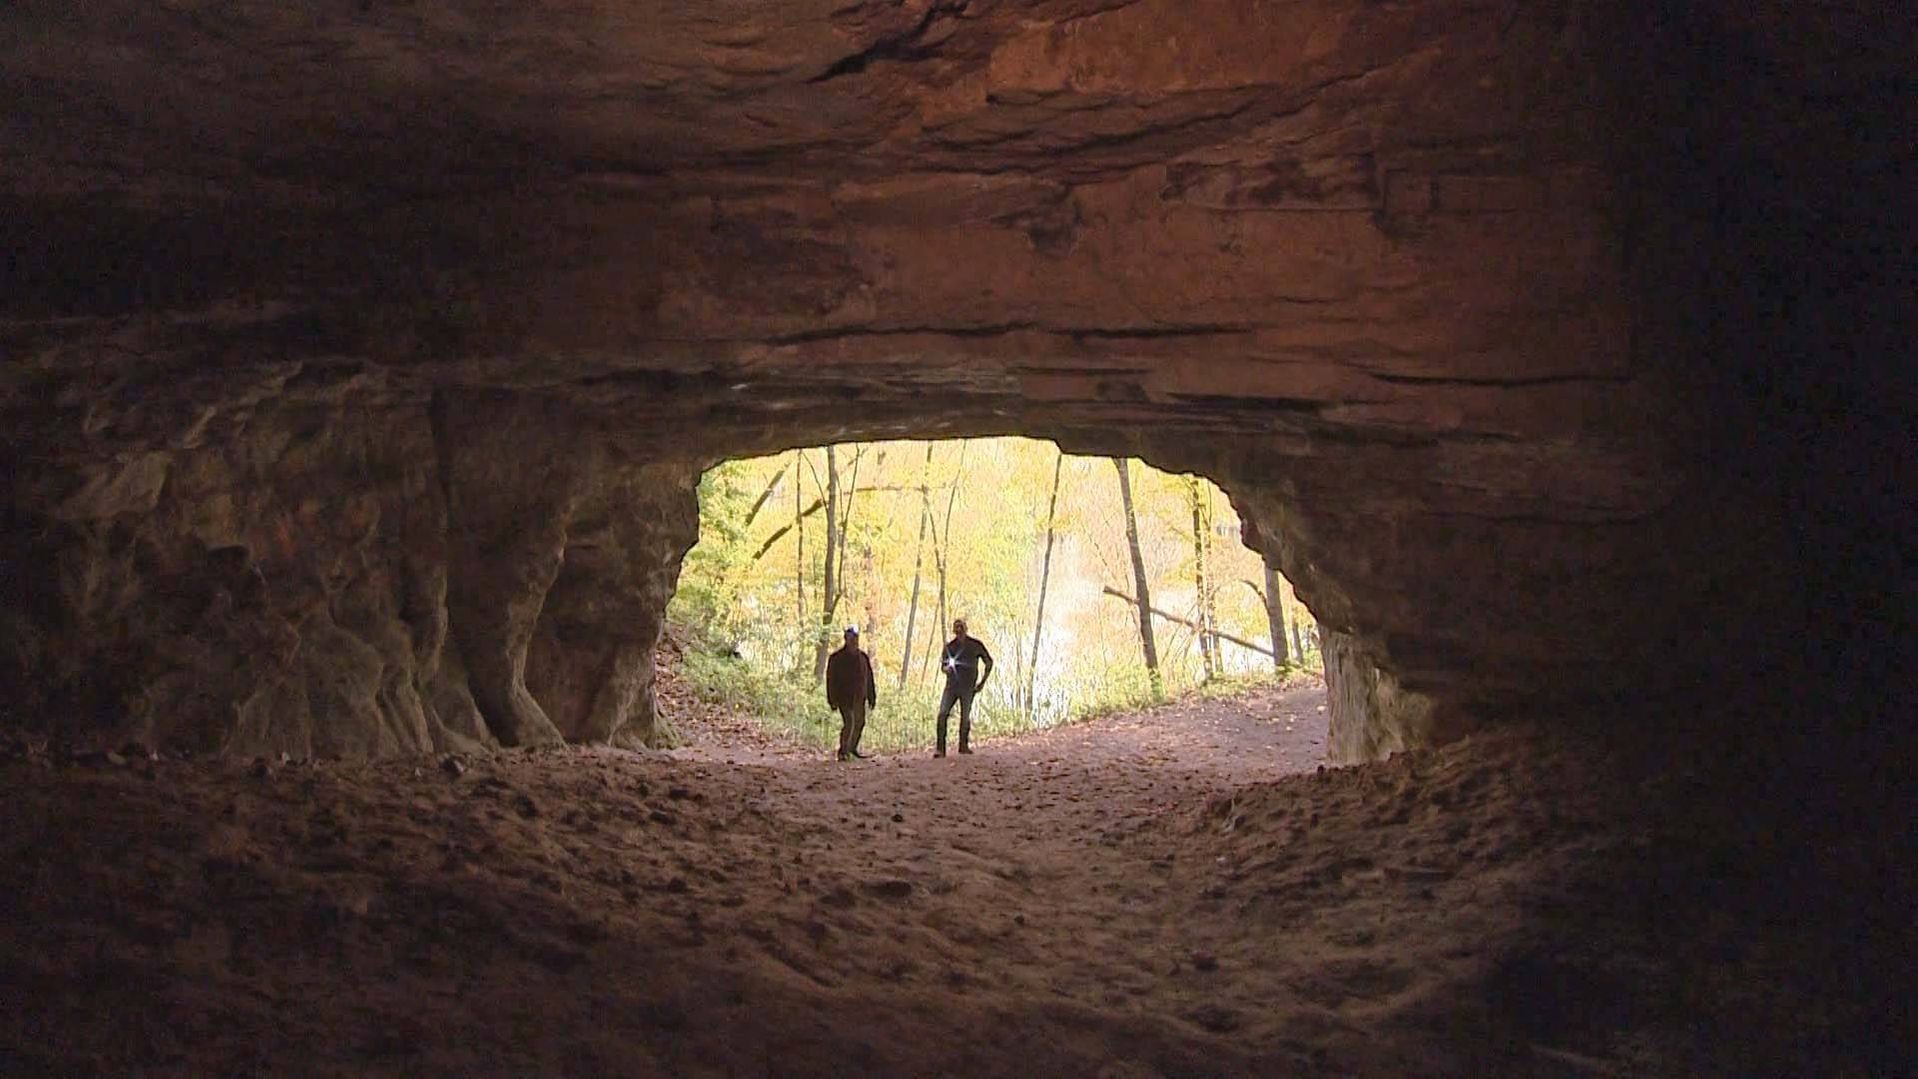 A natural cave in the St. Croix River Valley near Scandia, Minnesota.